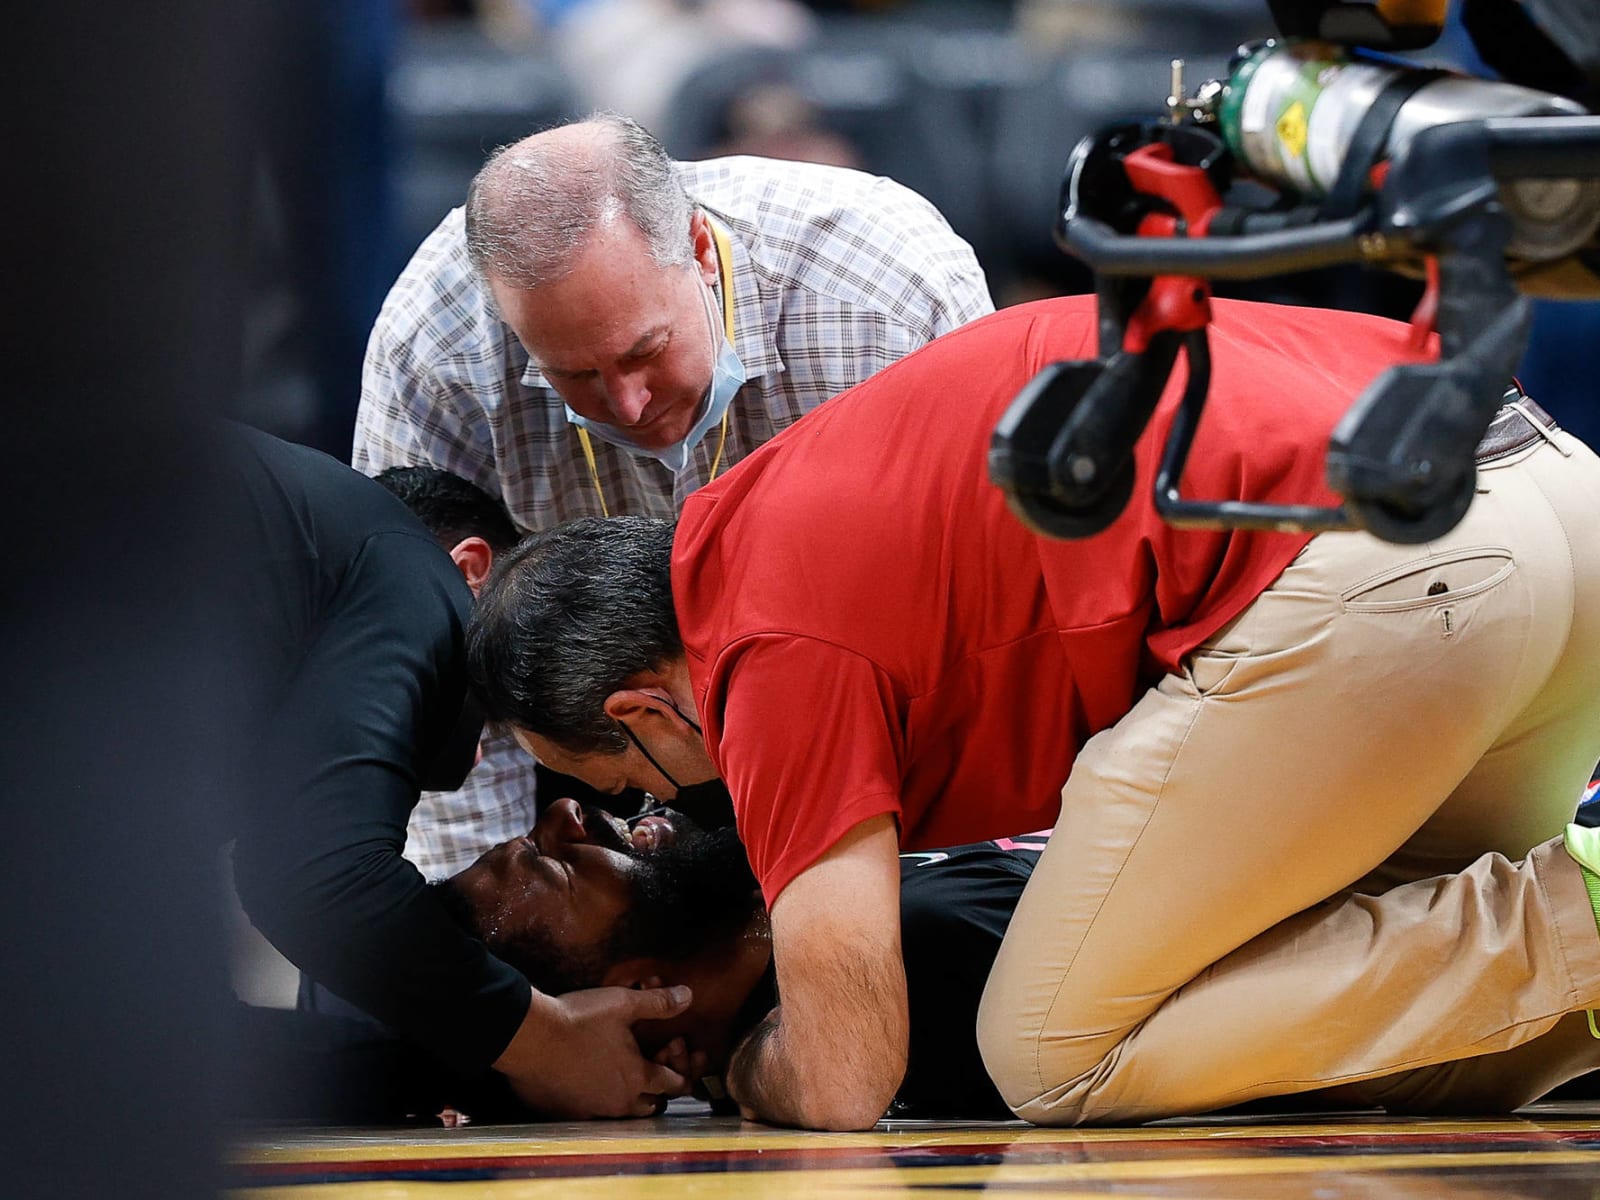 Nikola Jokic ejected after altercation with Markieff Morris, who suffers  apparent neck injury